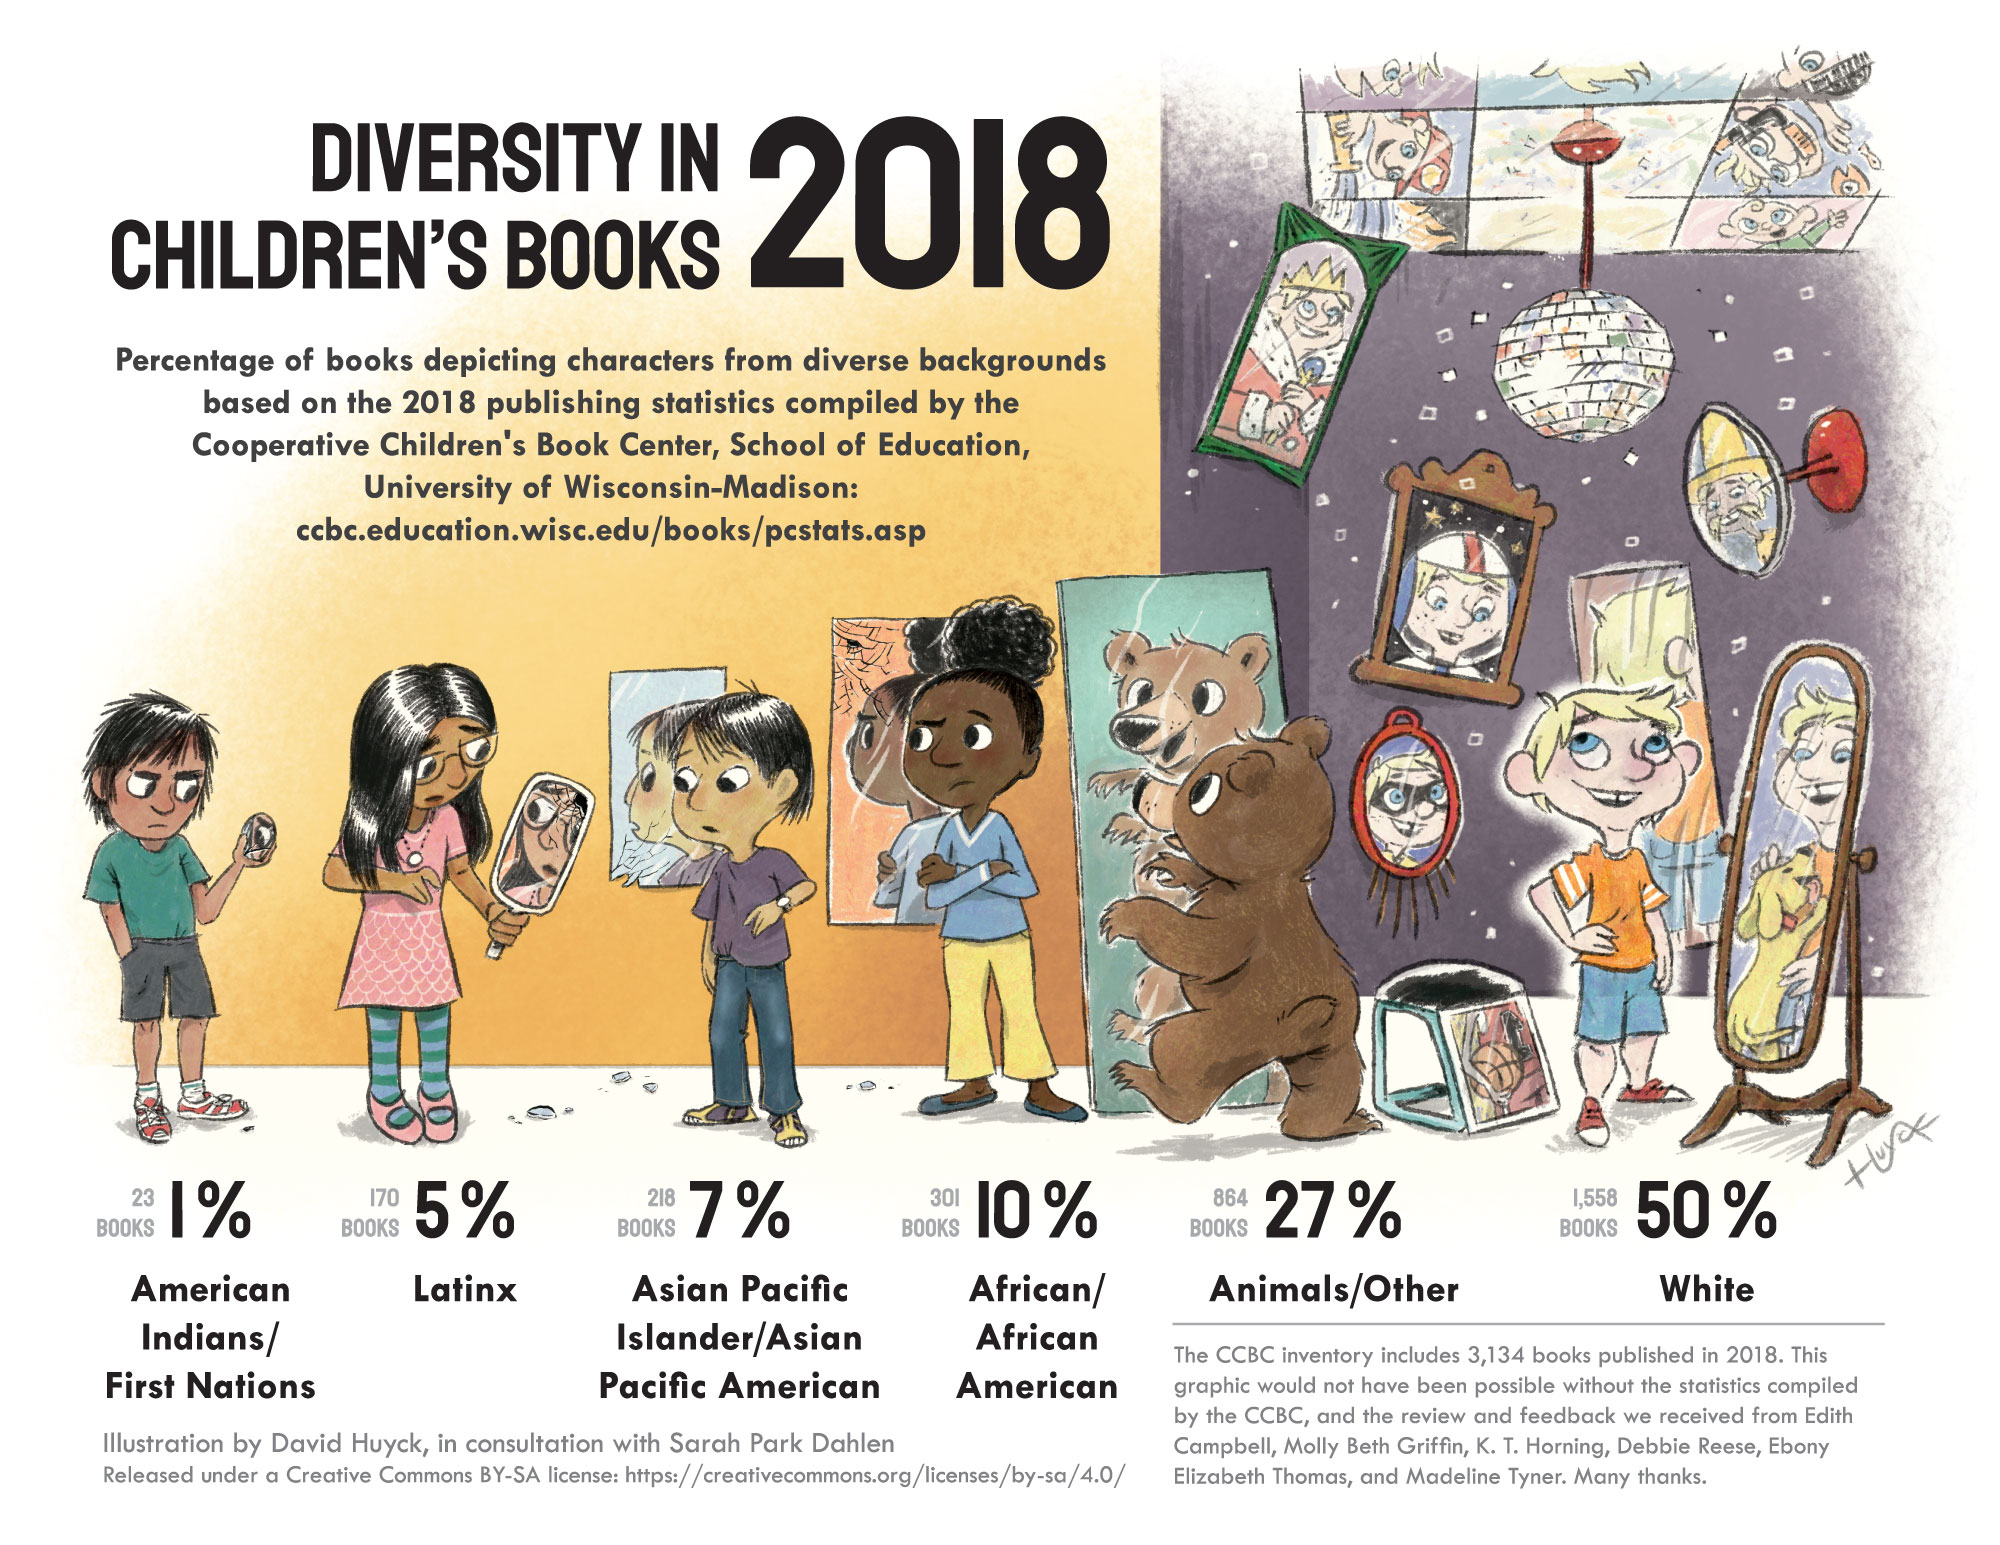 An info graphic depicting the 2018 percentage of books depicting character from diverse backgrounds based on the 2018 publishing statistics compiled by the Cooperative Children's Book Center.